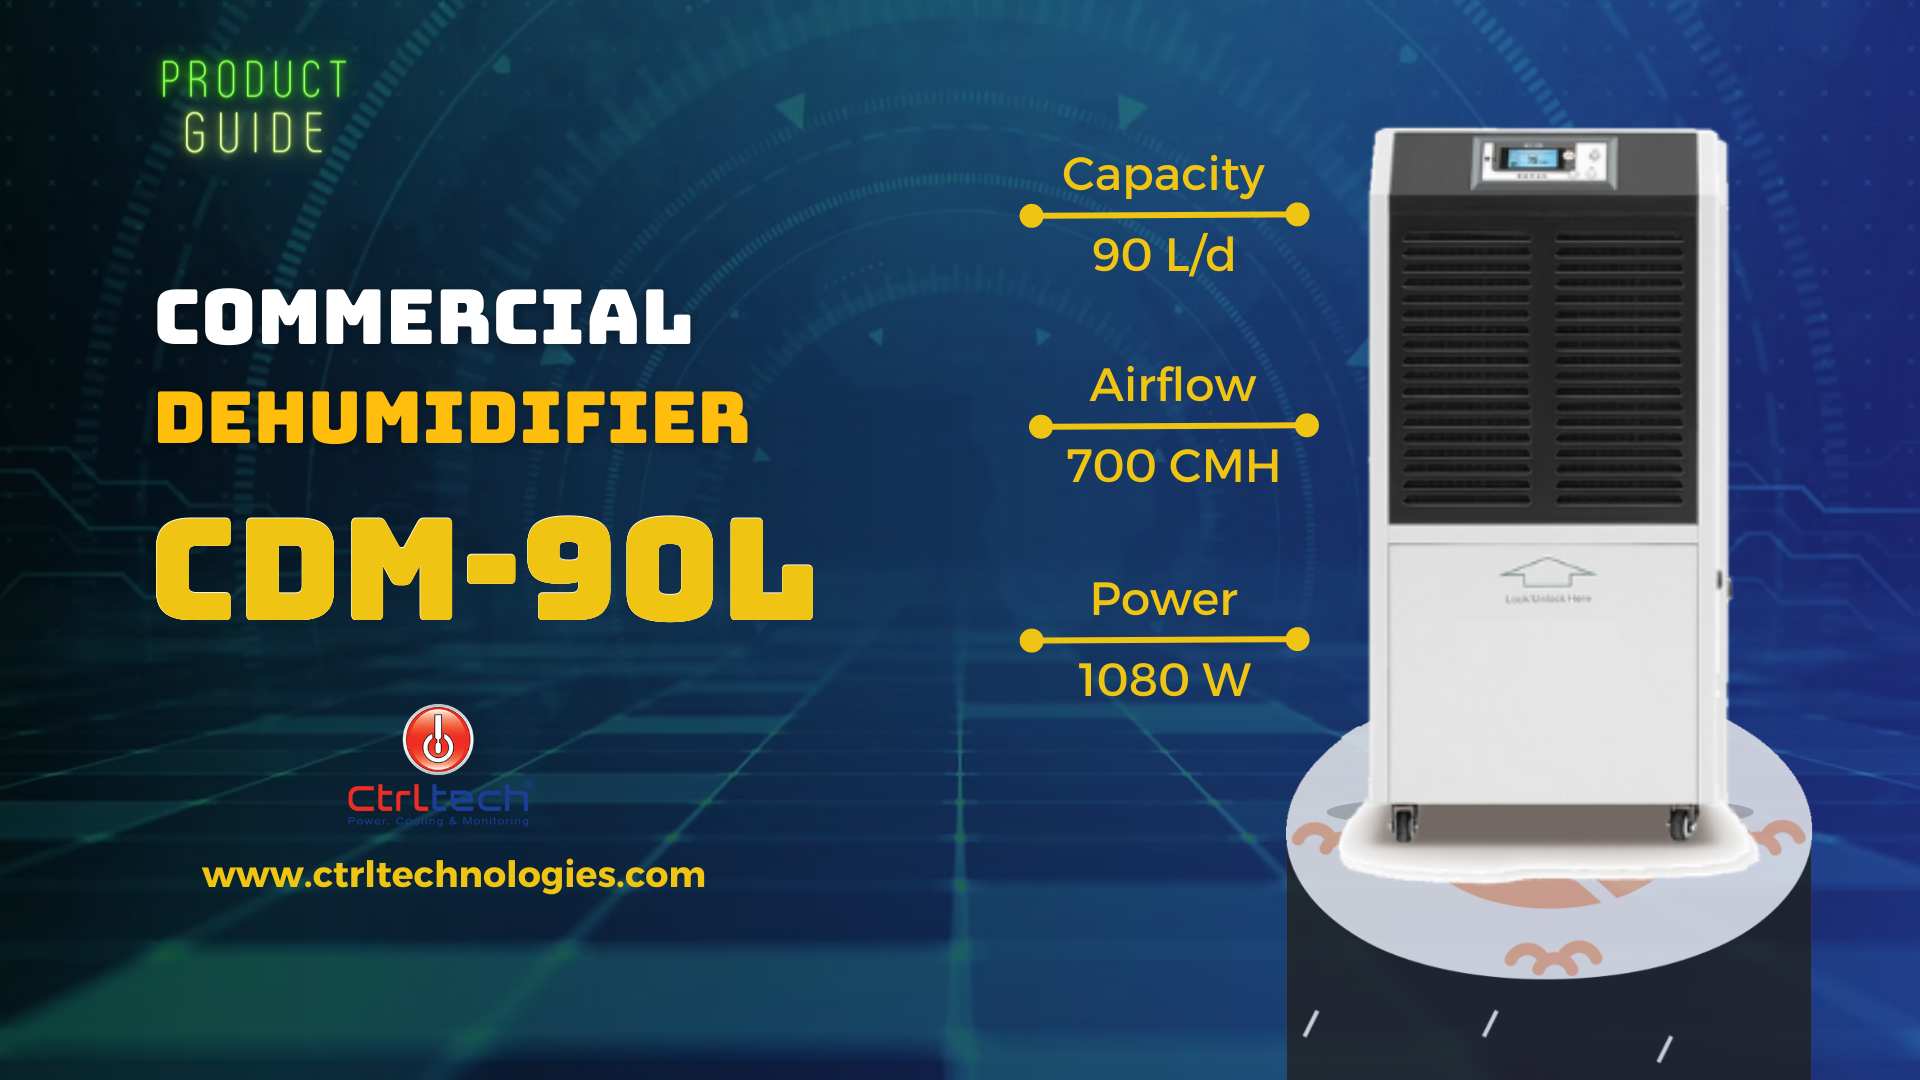 CDM-90L dehumidifier for industry - Operations explained